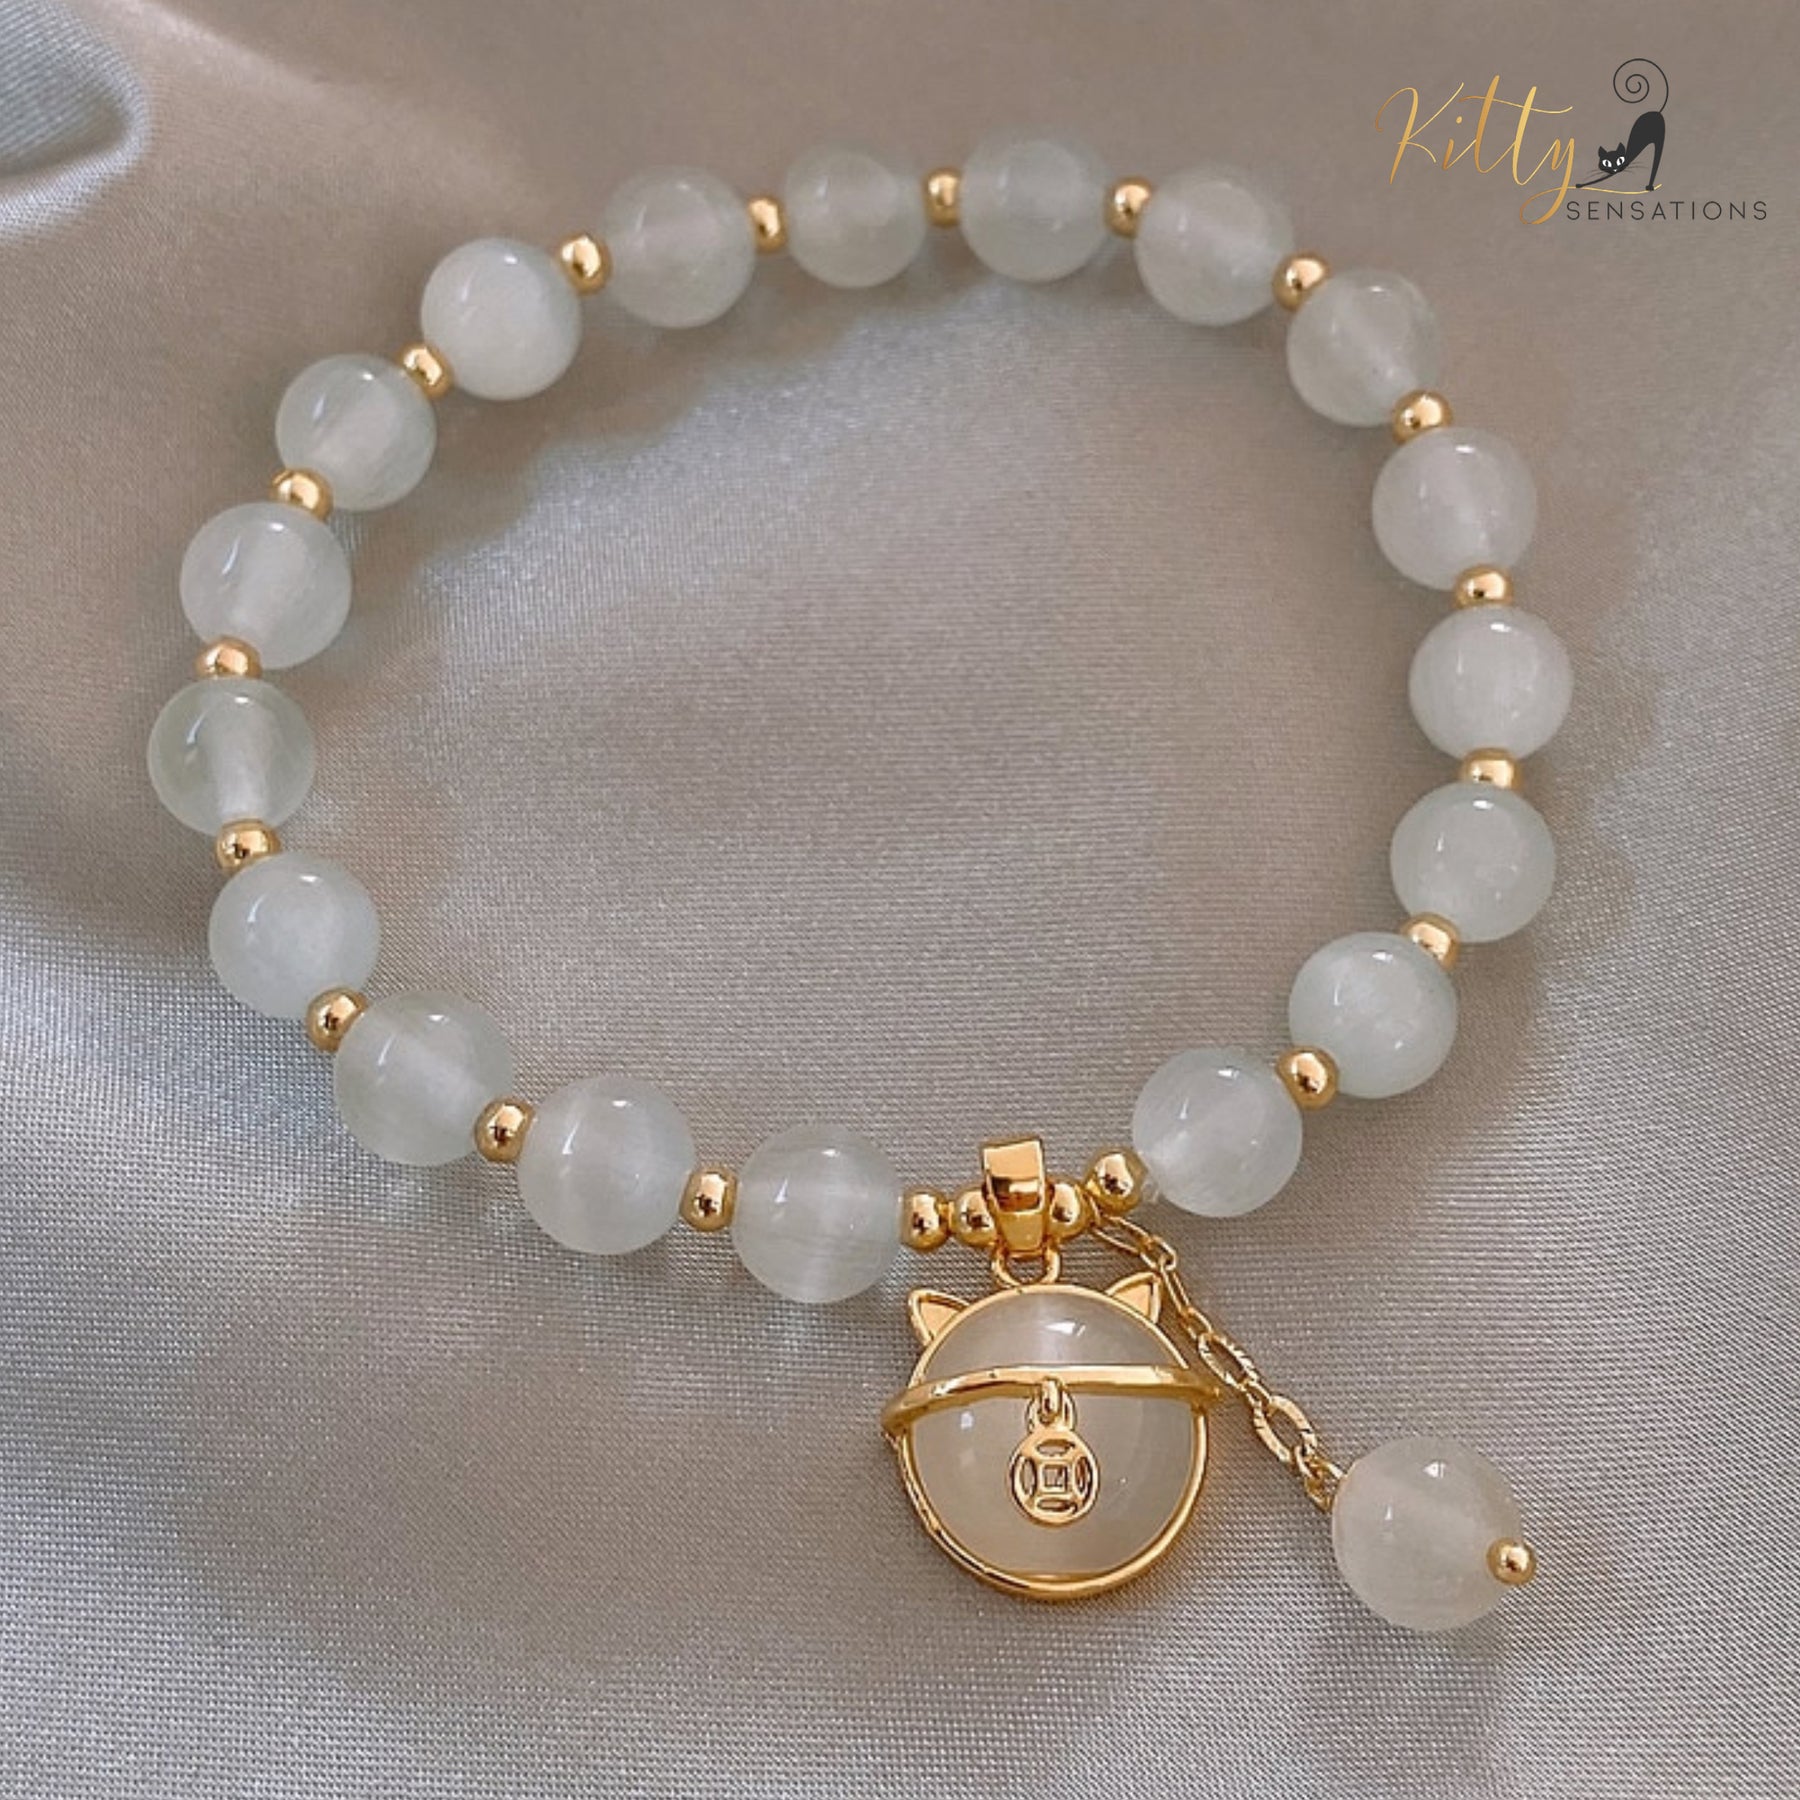 www.KittySensations.com Natural Opal with Golden Beads and Kitty Face Charm Bracelet ($24.40): https://www.kittysensations.com/products/natural-opal-cat-bracelet